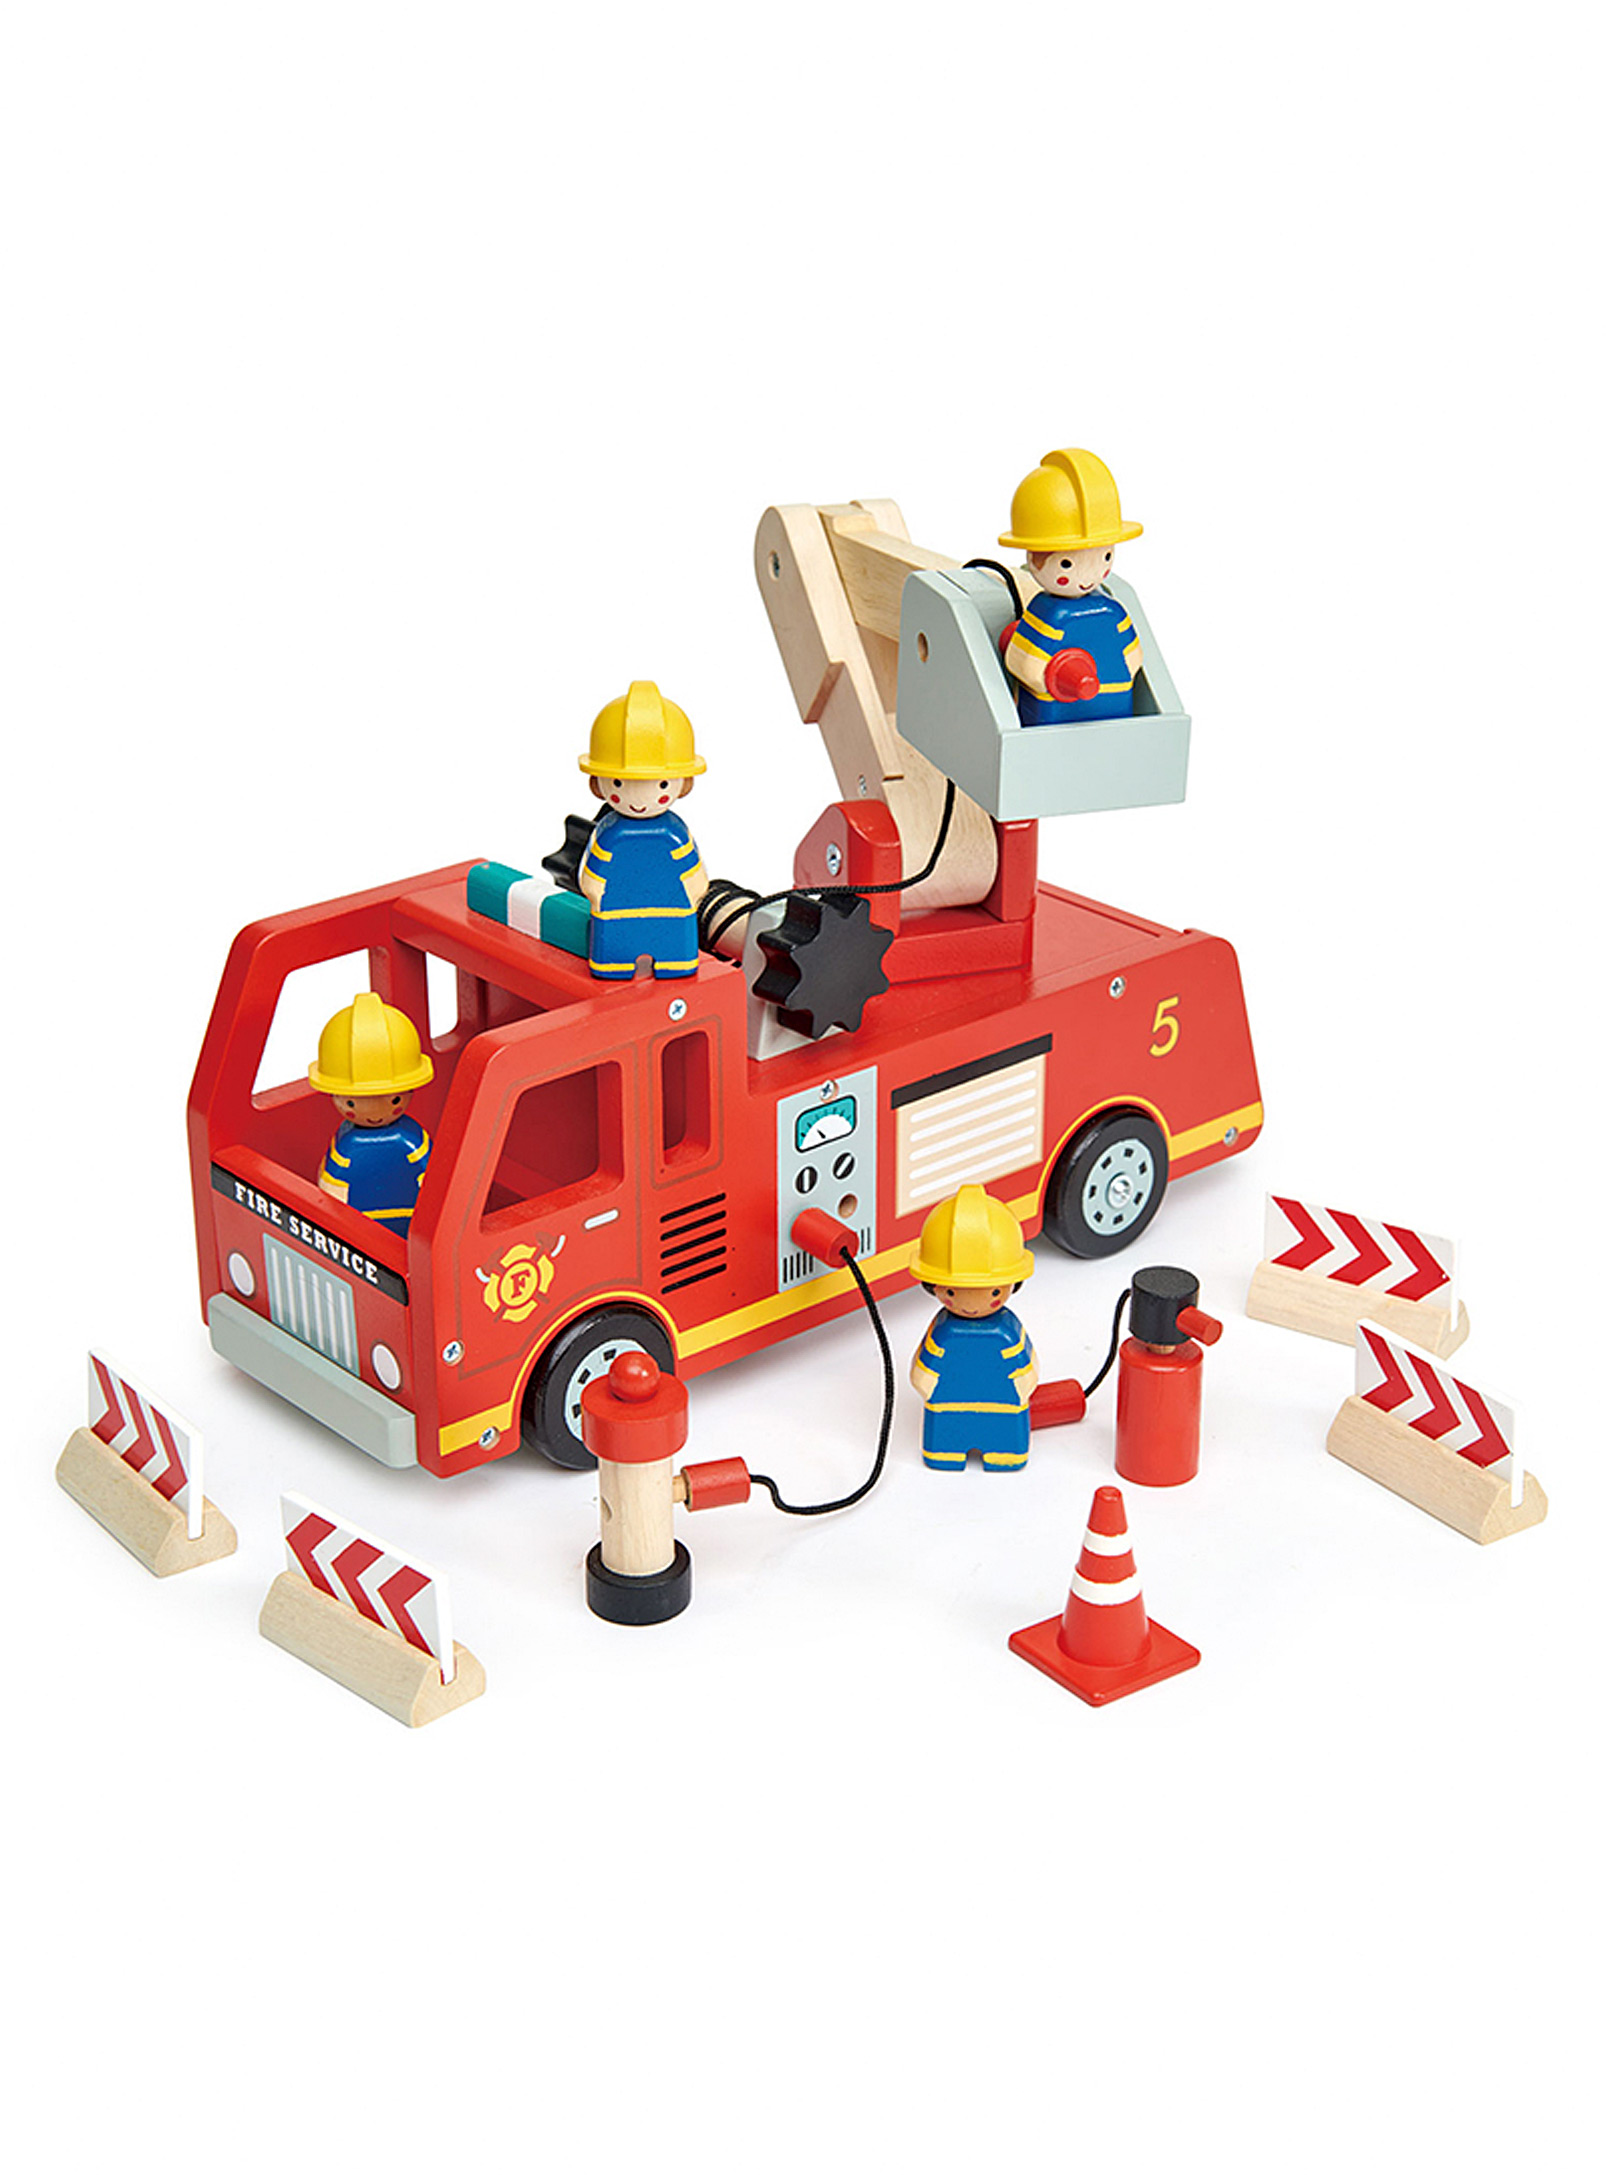 Tender Leaf Toys - Wooden fire engine and accessories 14-piece set